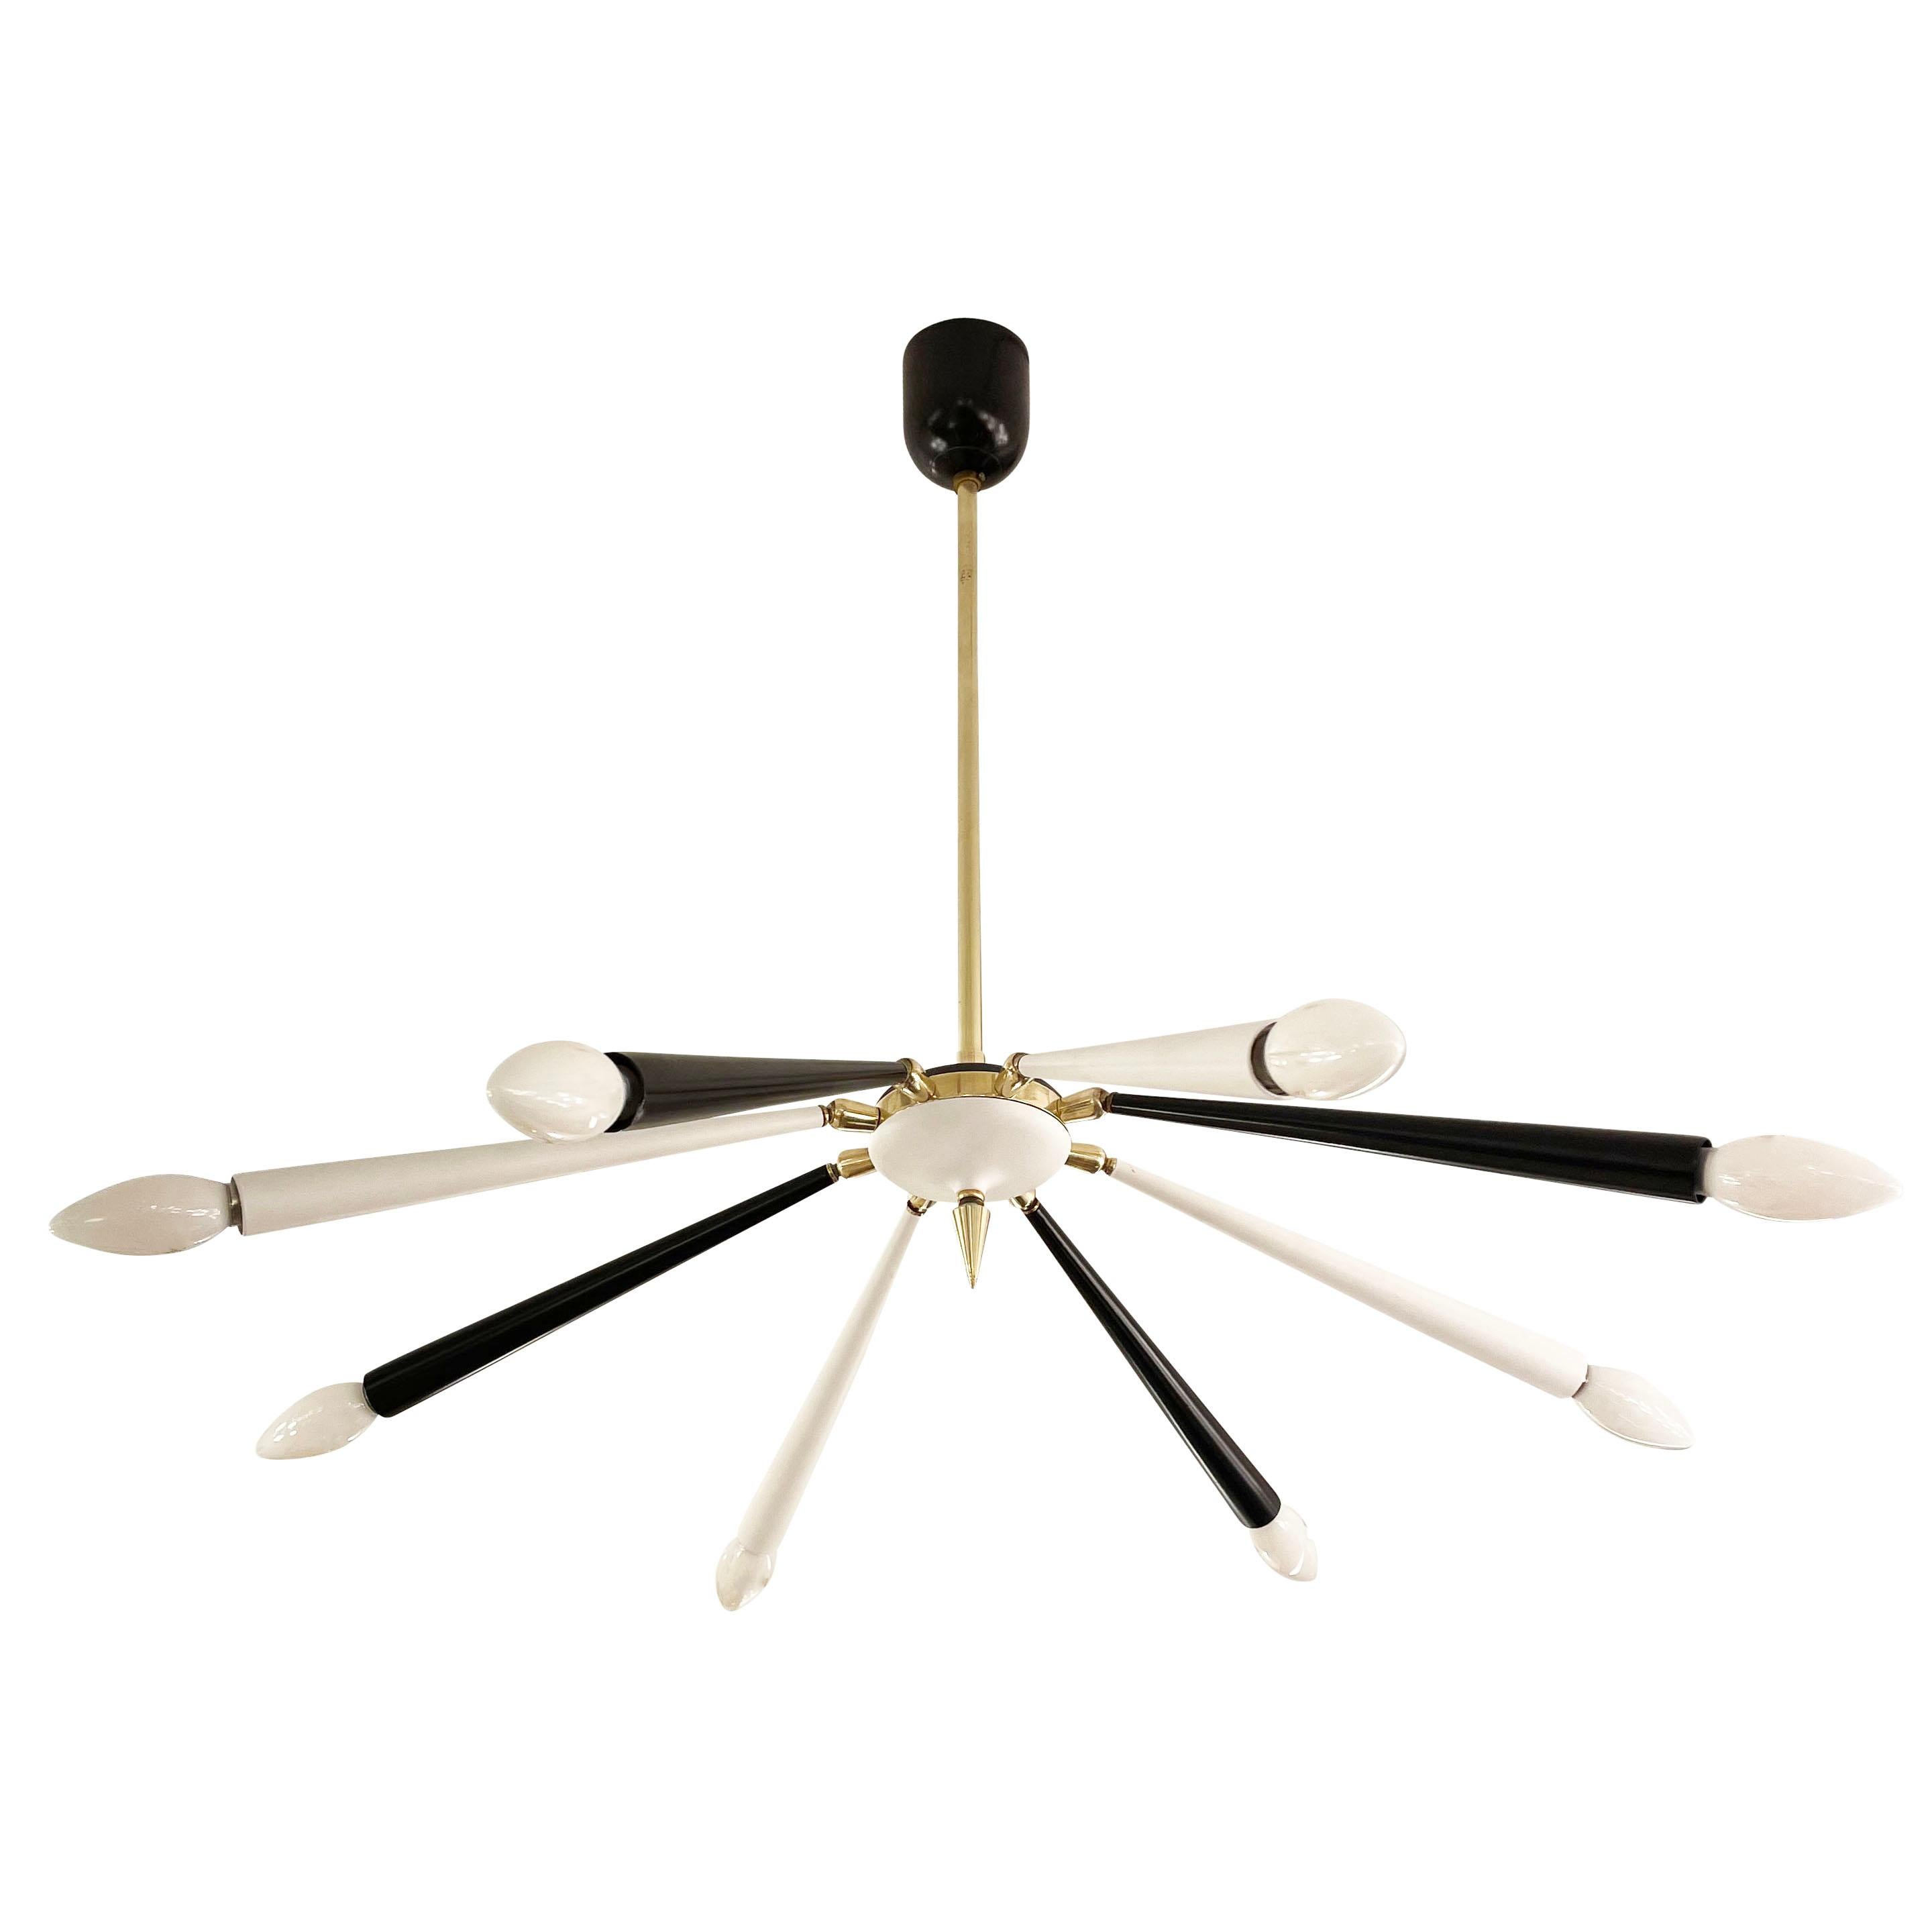 Italian mid-century chandelier with articulating black and white shades and brass details. The articulating joints allow the shades to be positioned in a variety of positions- we are showing it with all the shades slightly bent downwards. Holds